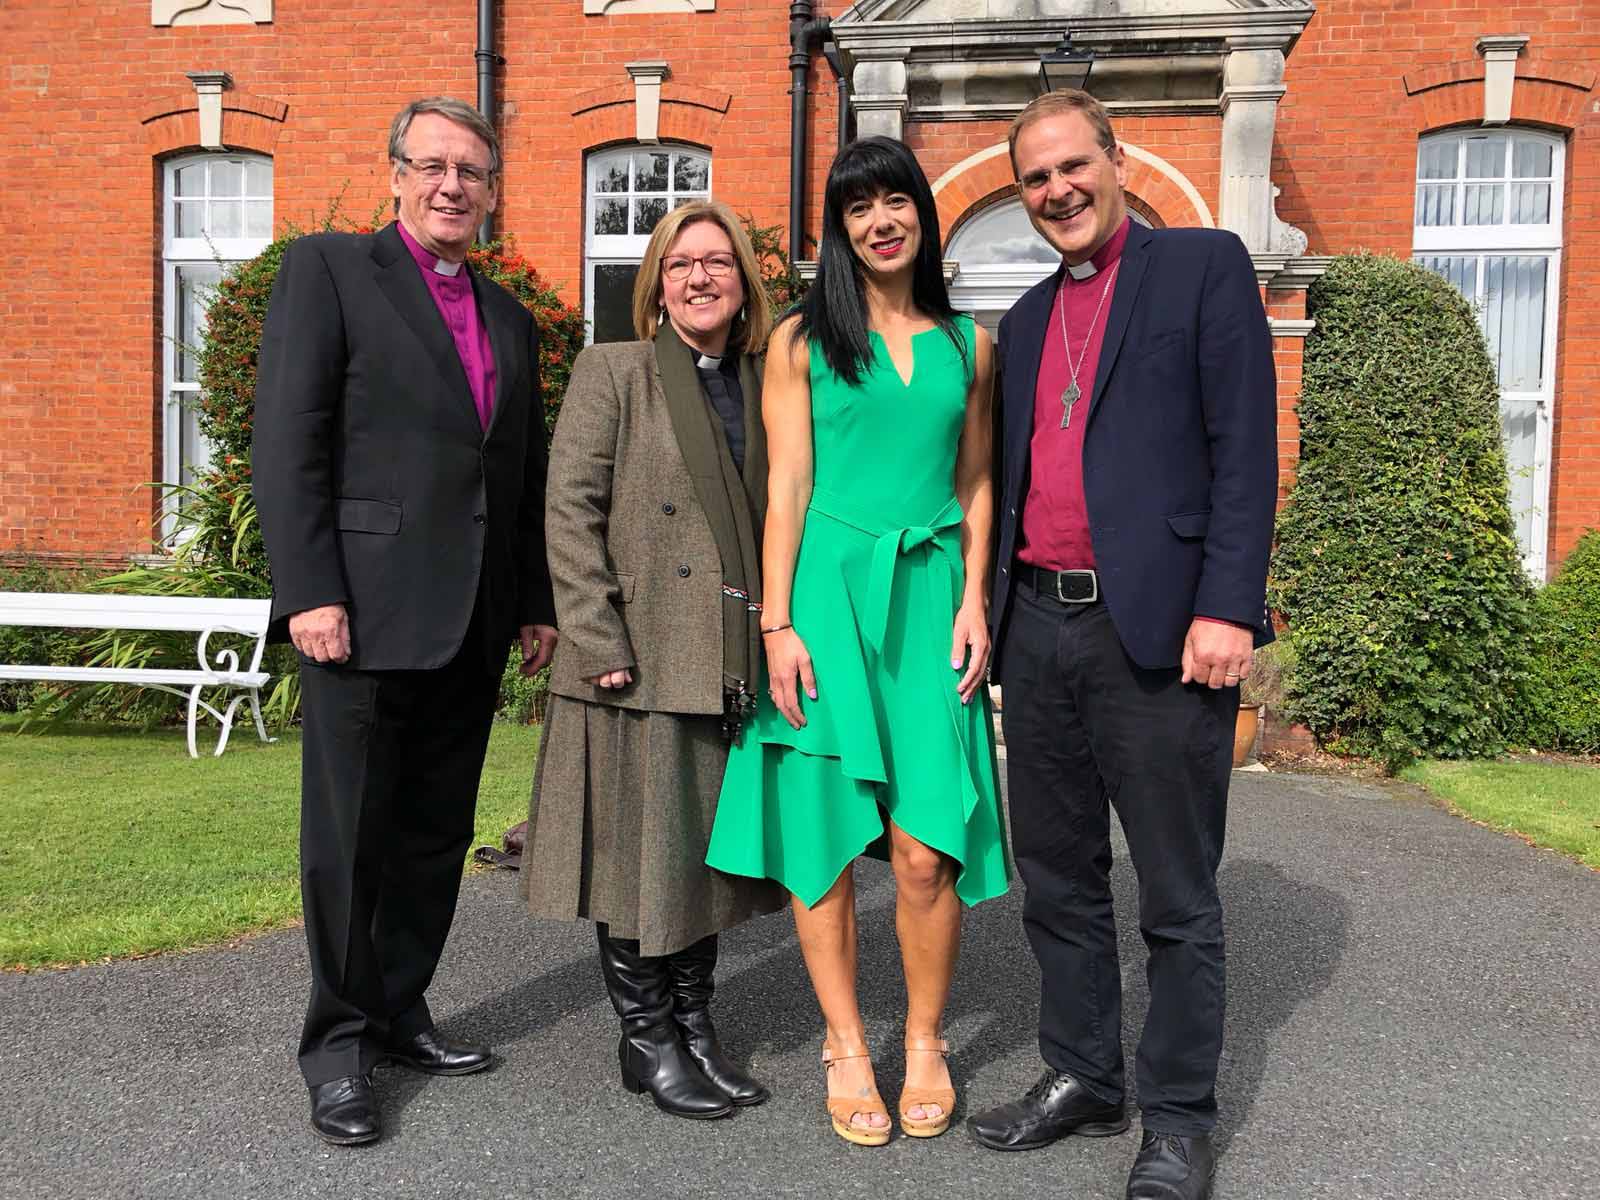 The Church of Ireland's inter-faith working group (IFWG), as it stands at present: the Rt. Rev Kenneth Kearon, the Rev Suzanne Cousins, and Ms Georgina Copty with the Bishop of Bradford, the Rt Rev Dr Toby Howarth.